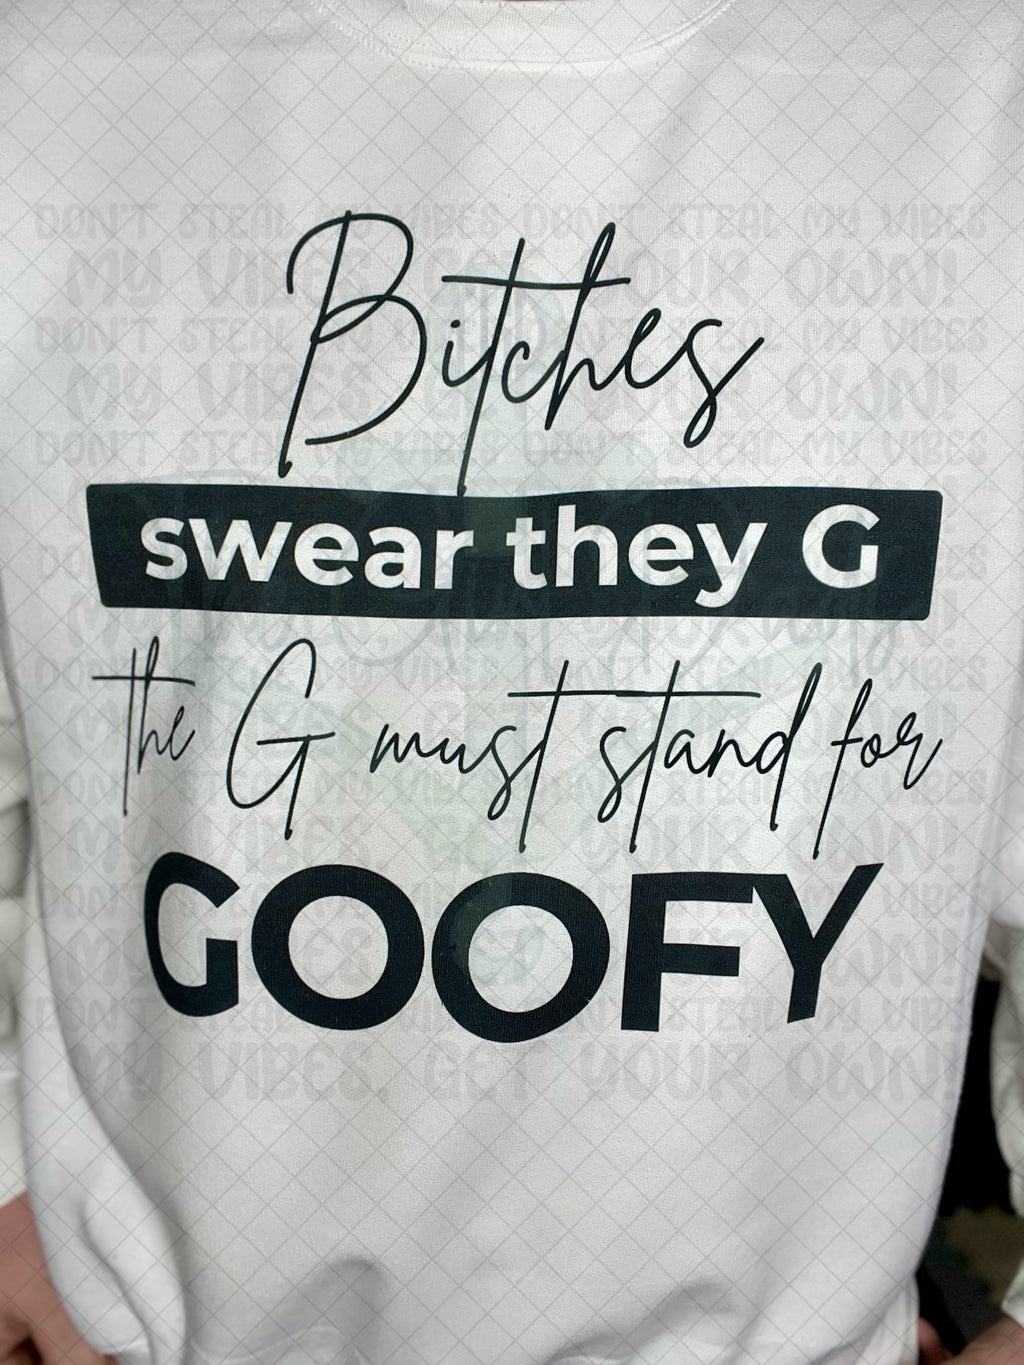 Bitches Swear They G The G Must Stand For Goofy Top Design